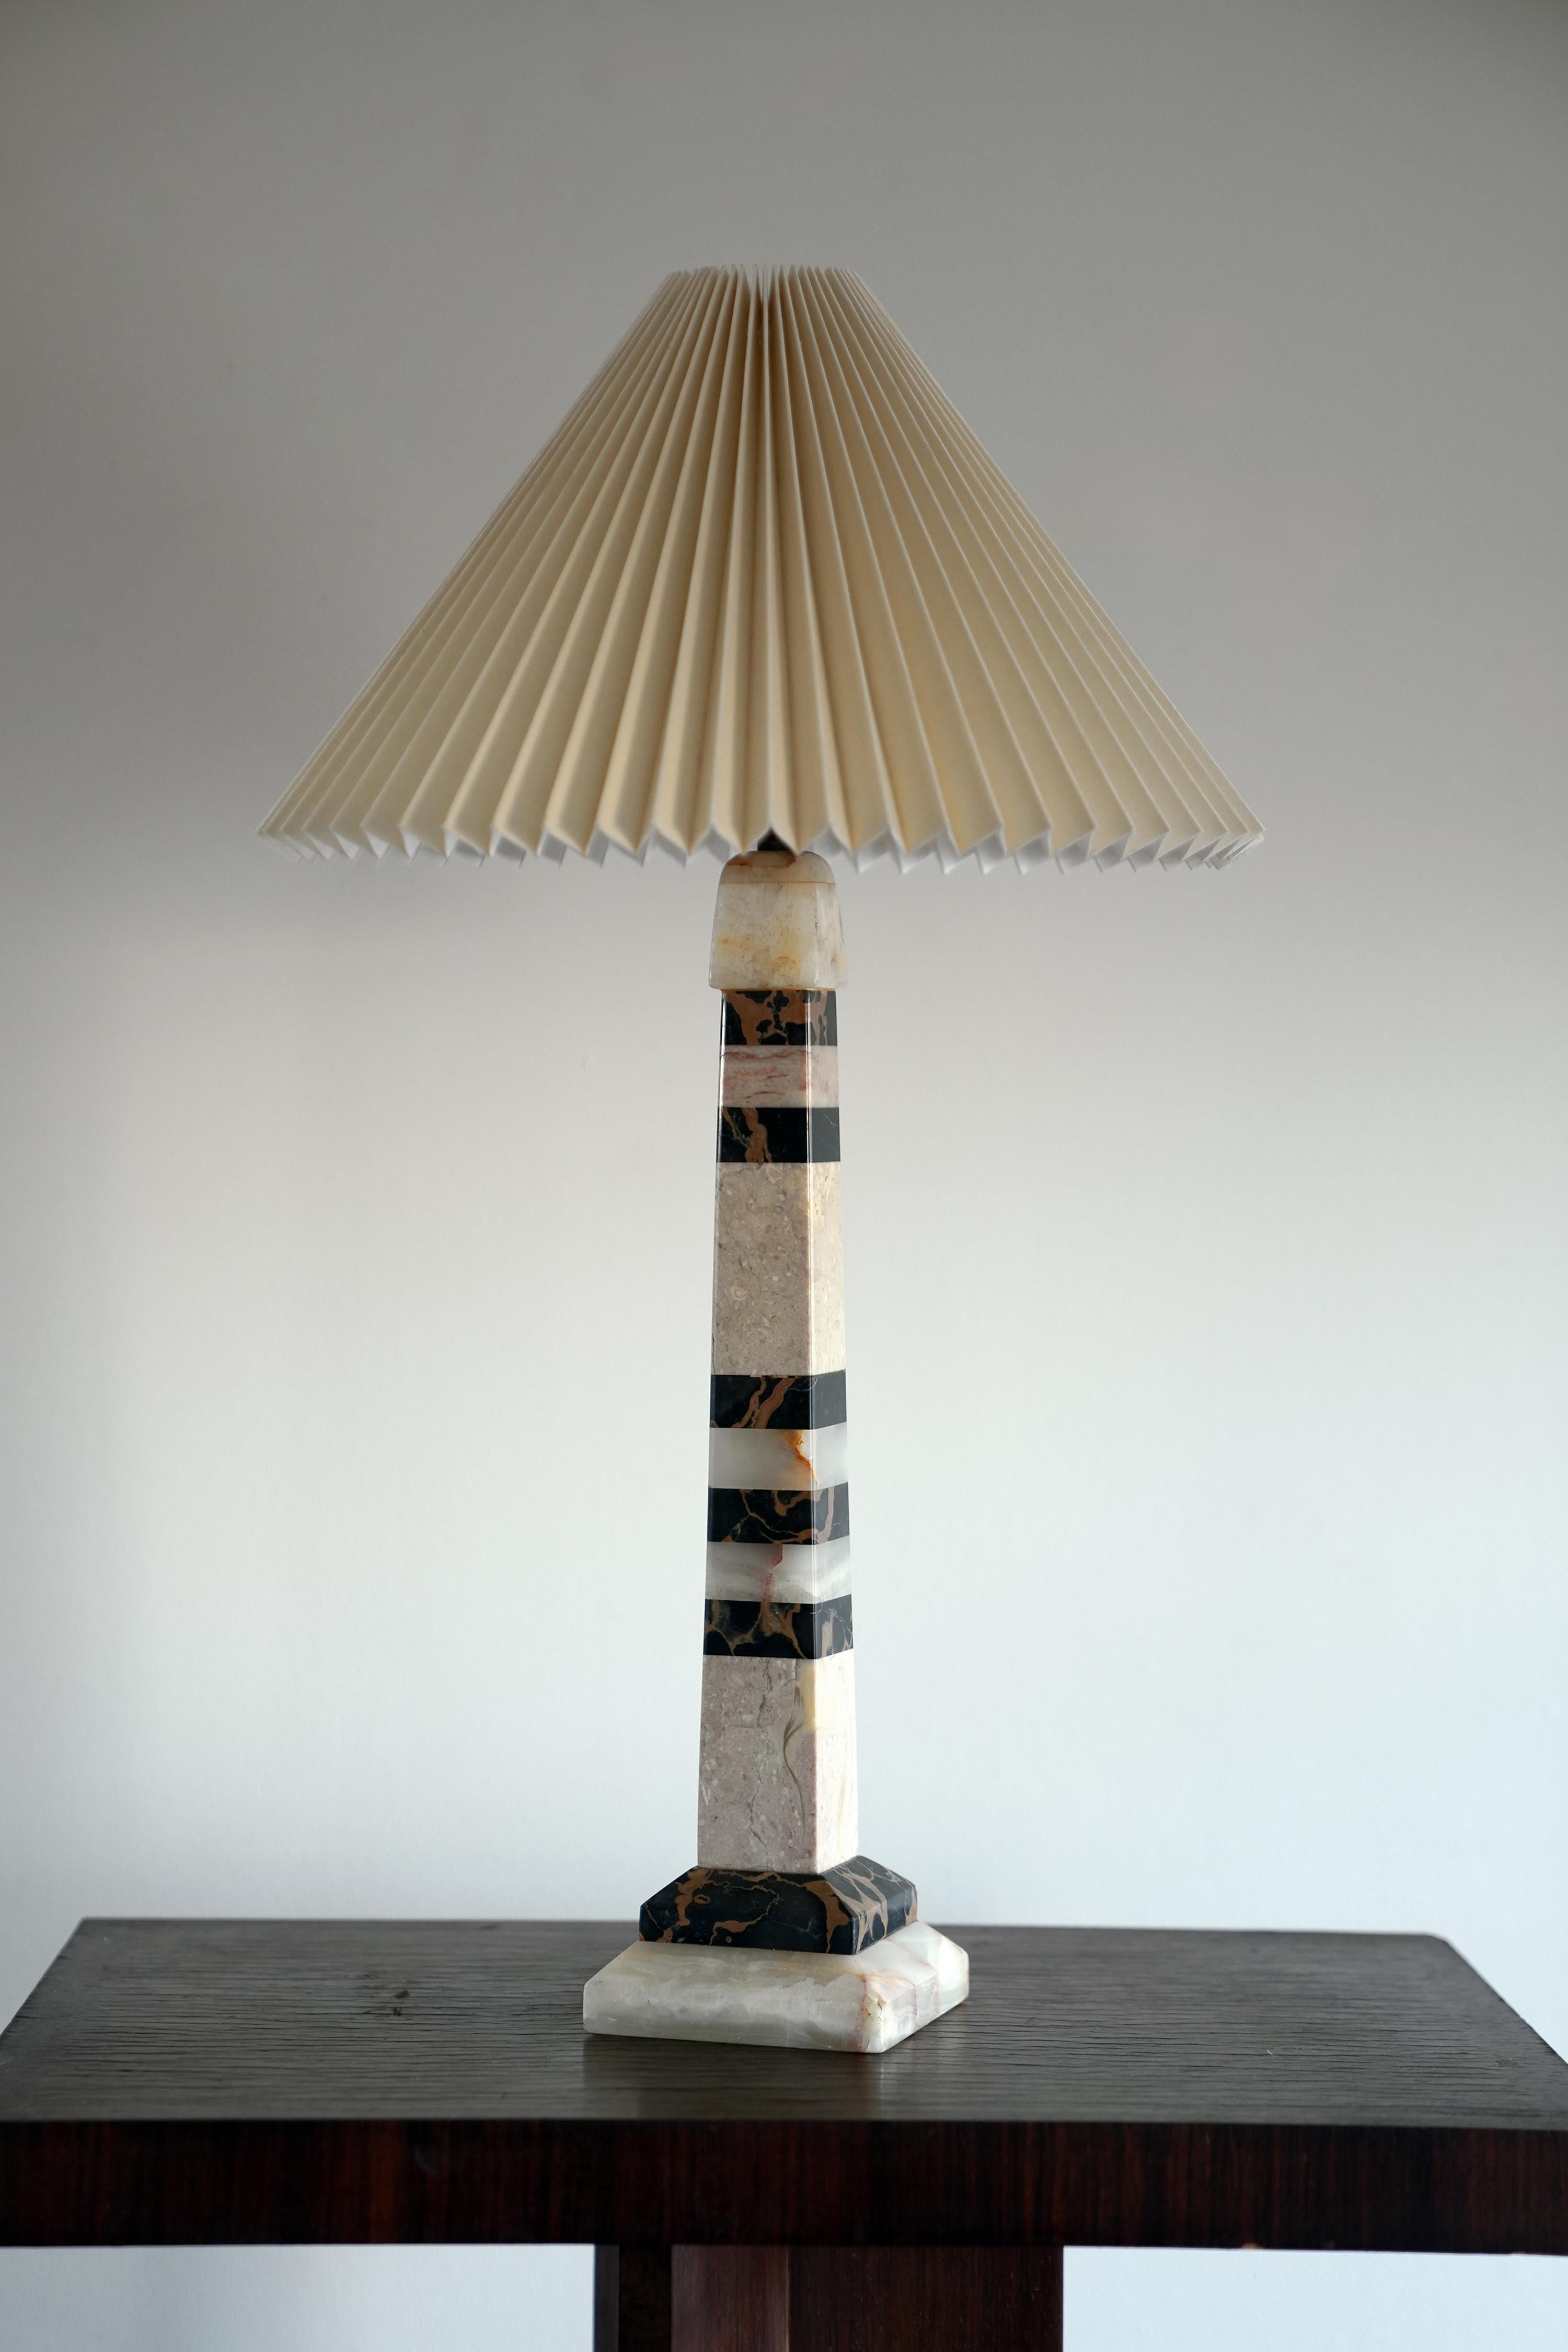 Specimen Marble table lamp c.1950s Italian.
Sculptural and beautifully graphic design. Mix of marble and onyx. 
Obelisk form